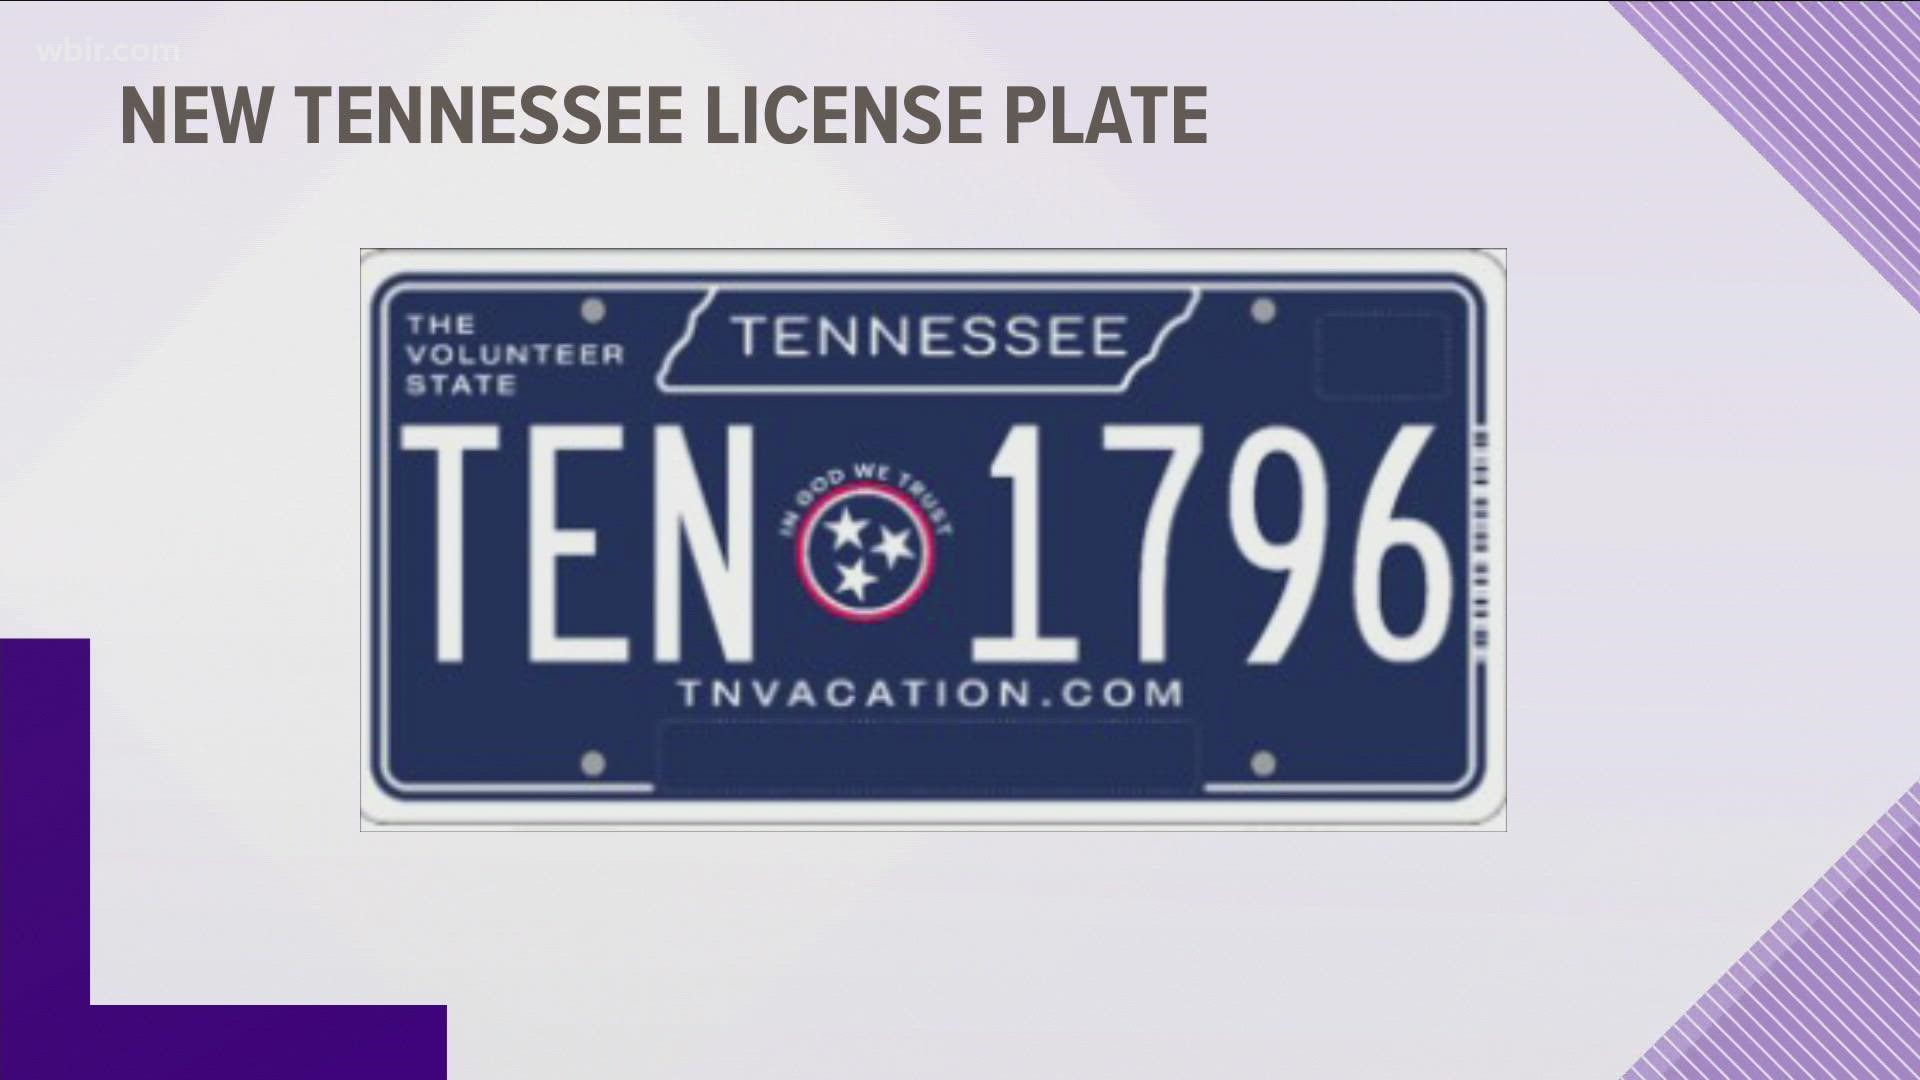 The new plates will be available online and in-person starting on Monday